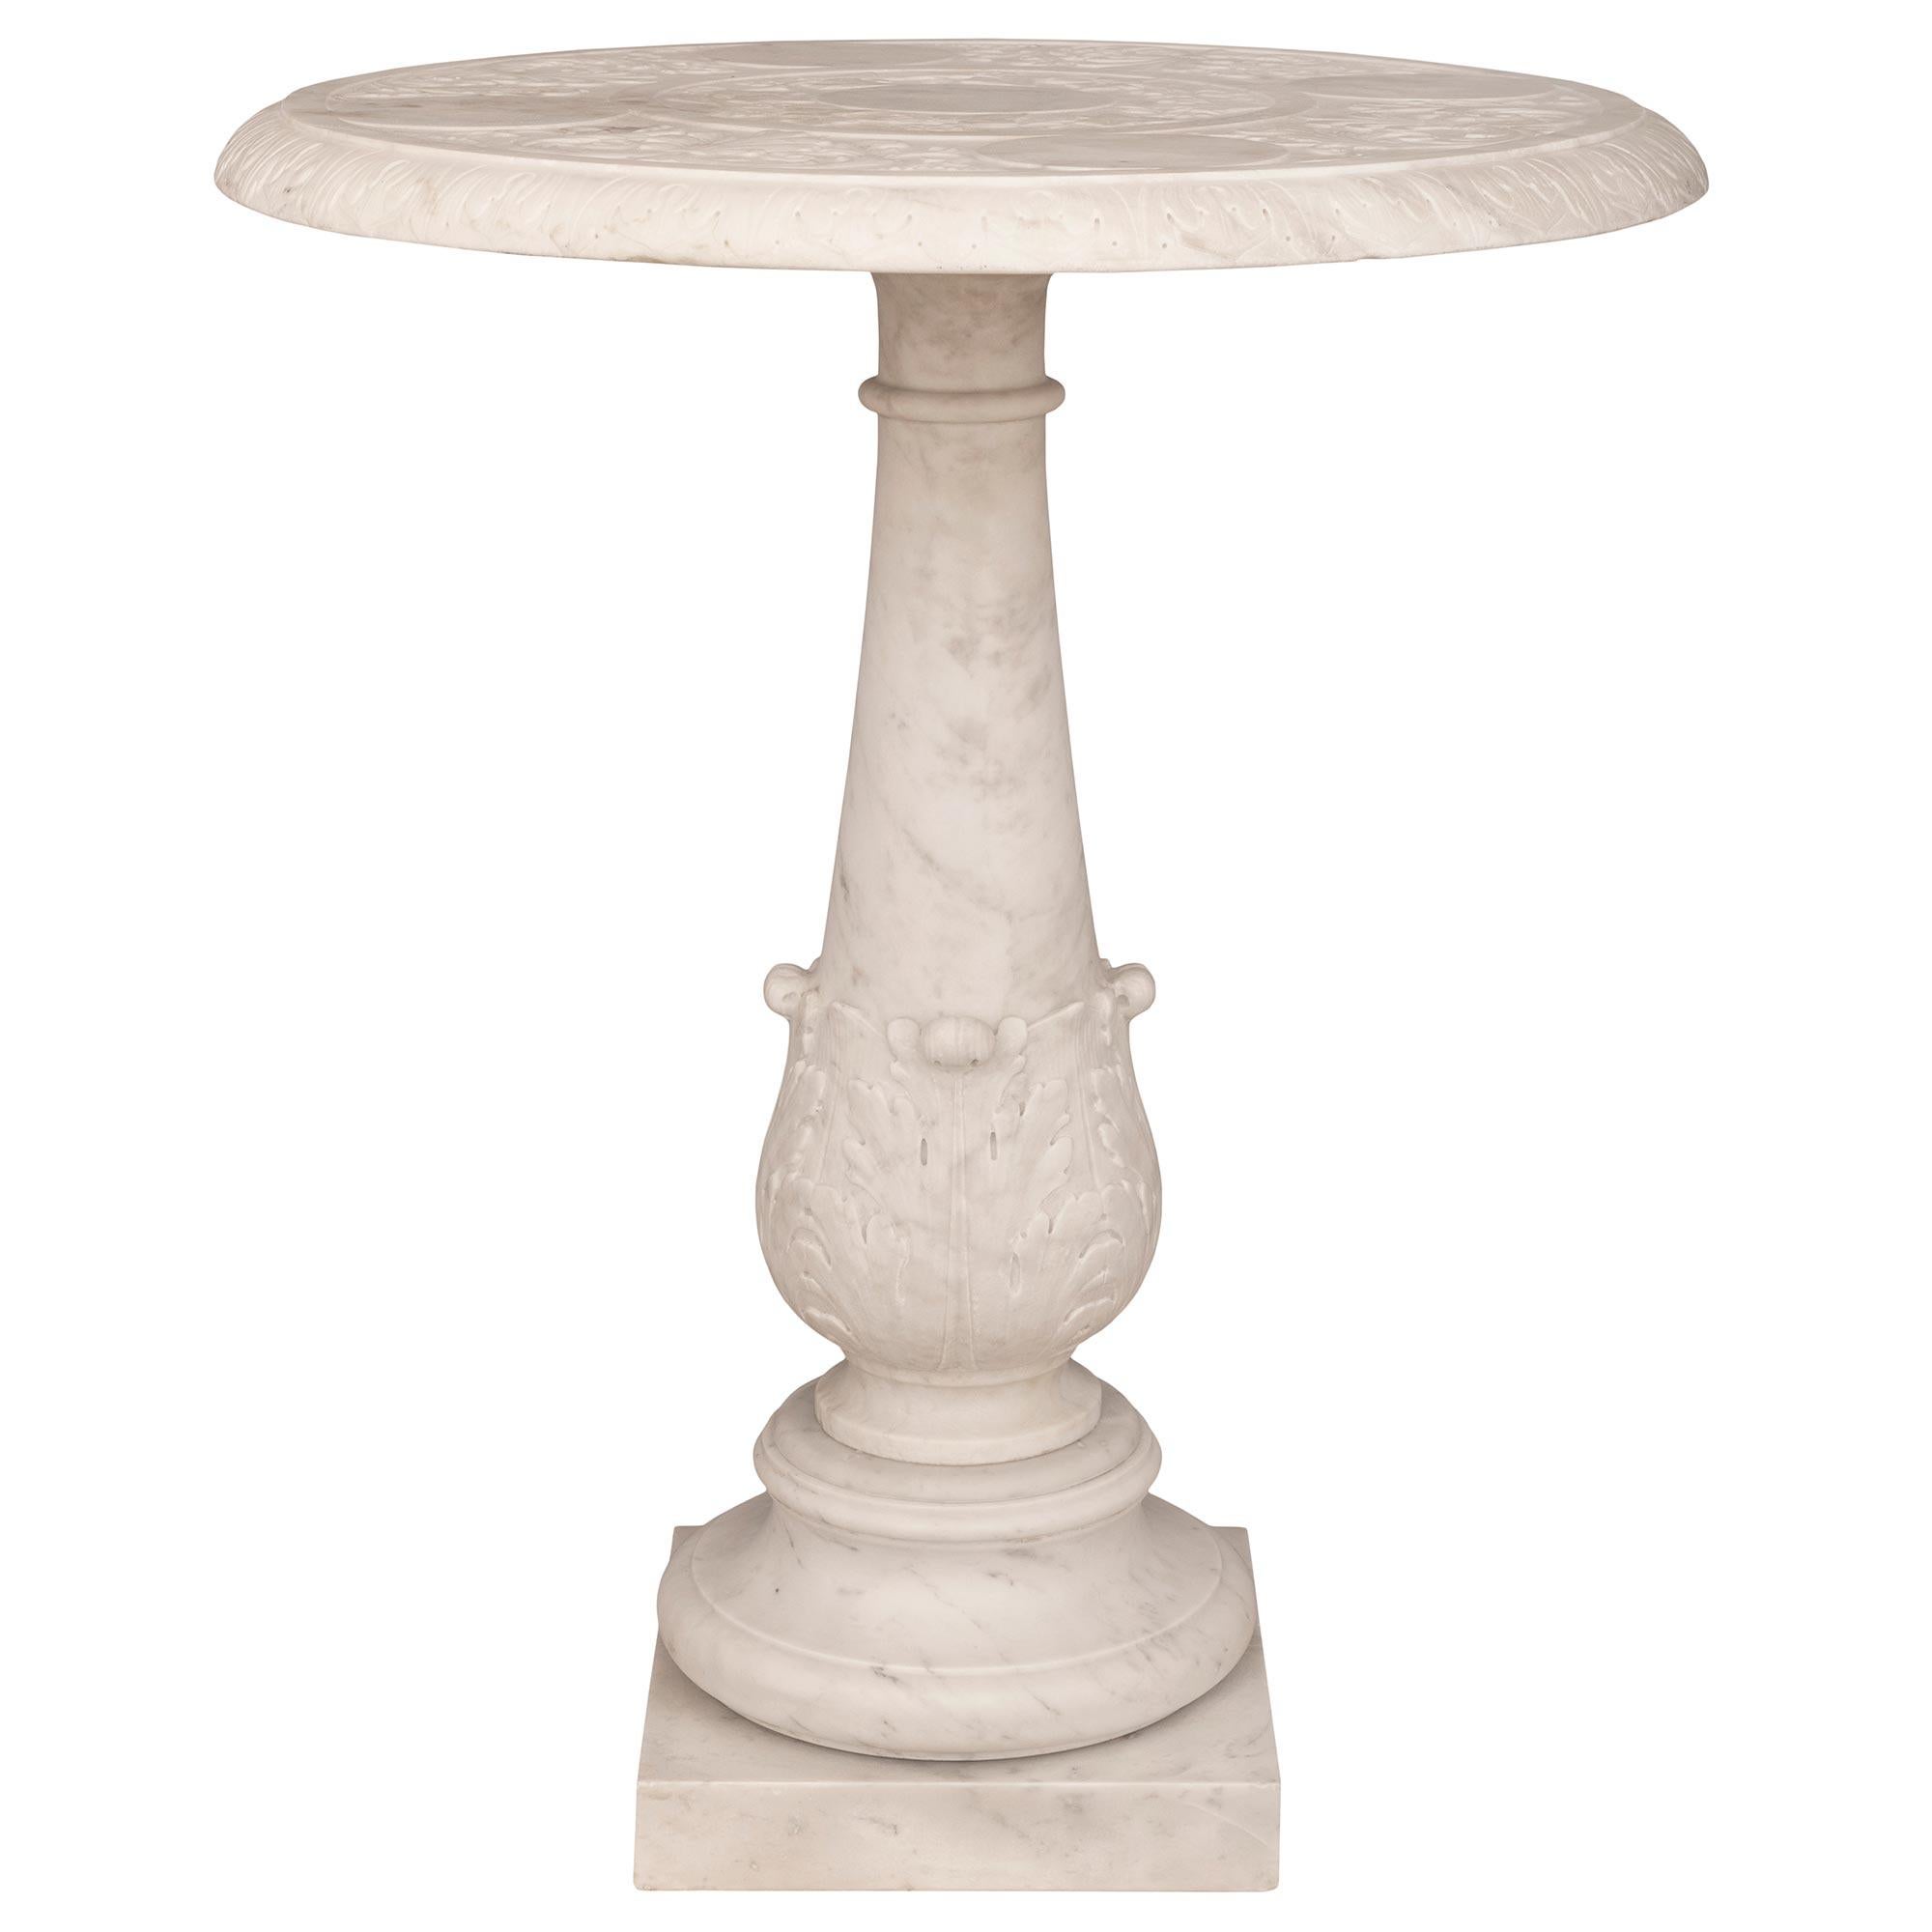 Italian 19th Century Louis XVI St. Solid White Carrara Marble Side Table For Sale 6